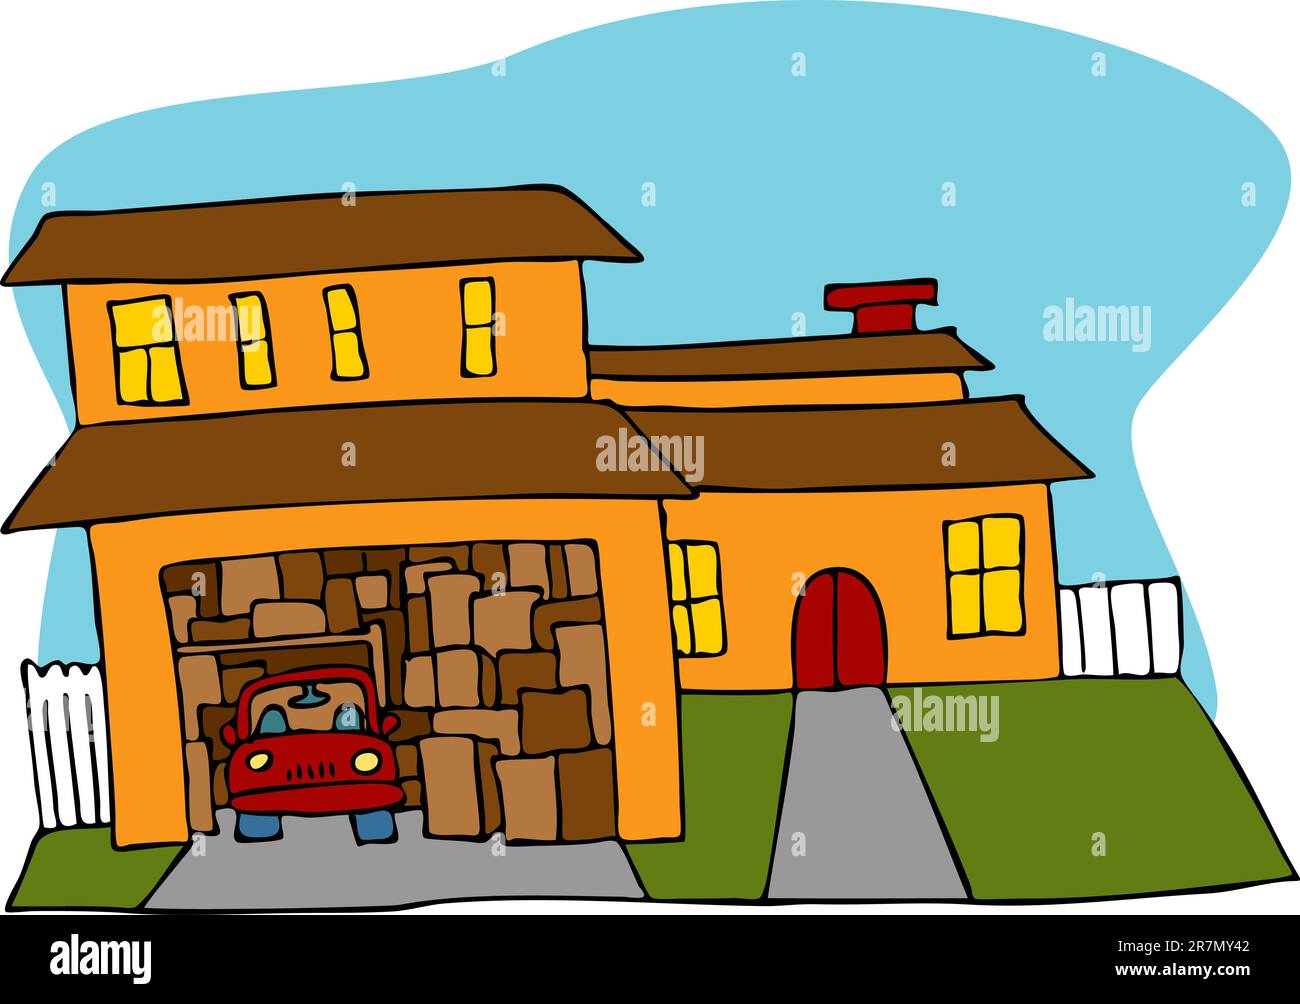 An image of a garage crowded with boxes and a car. Stock Vector